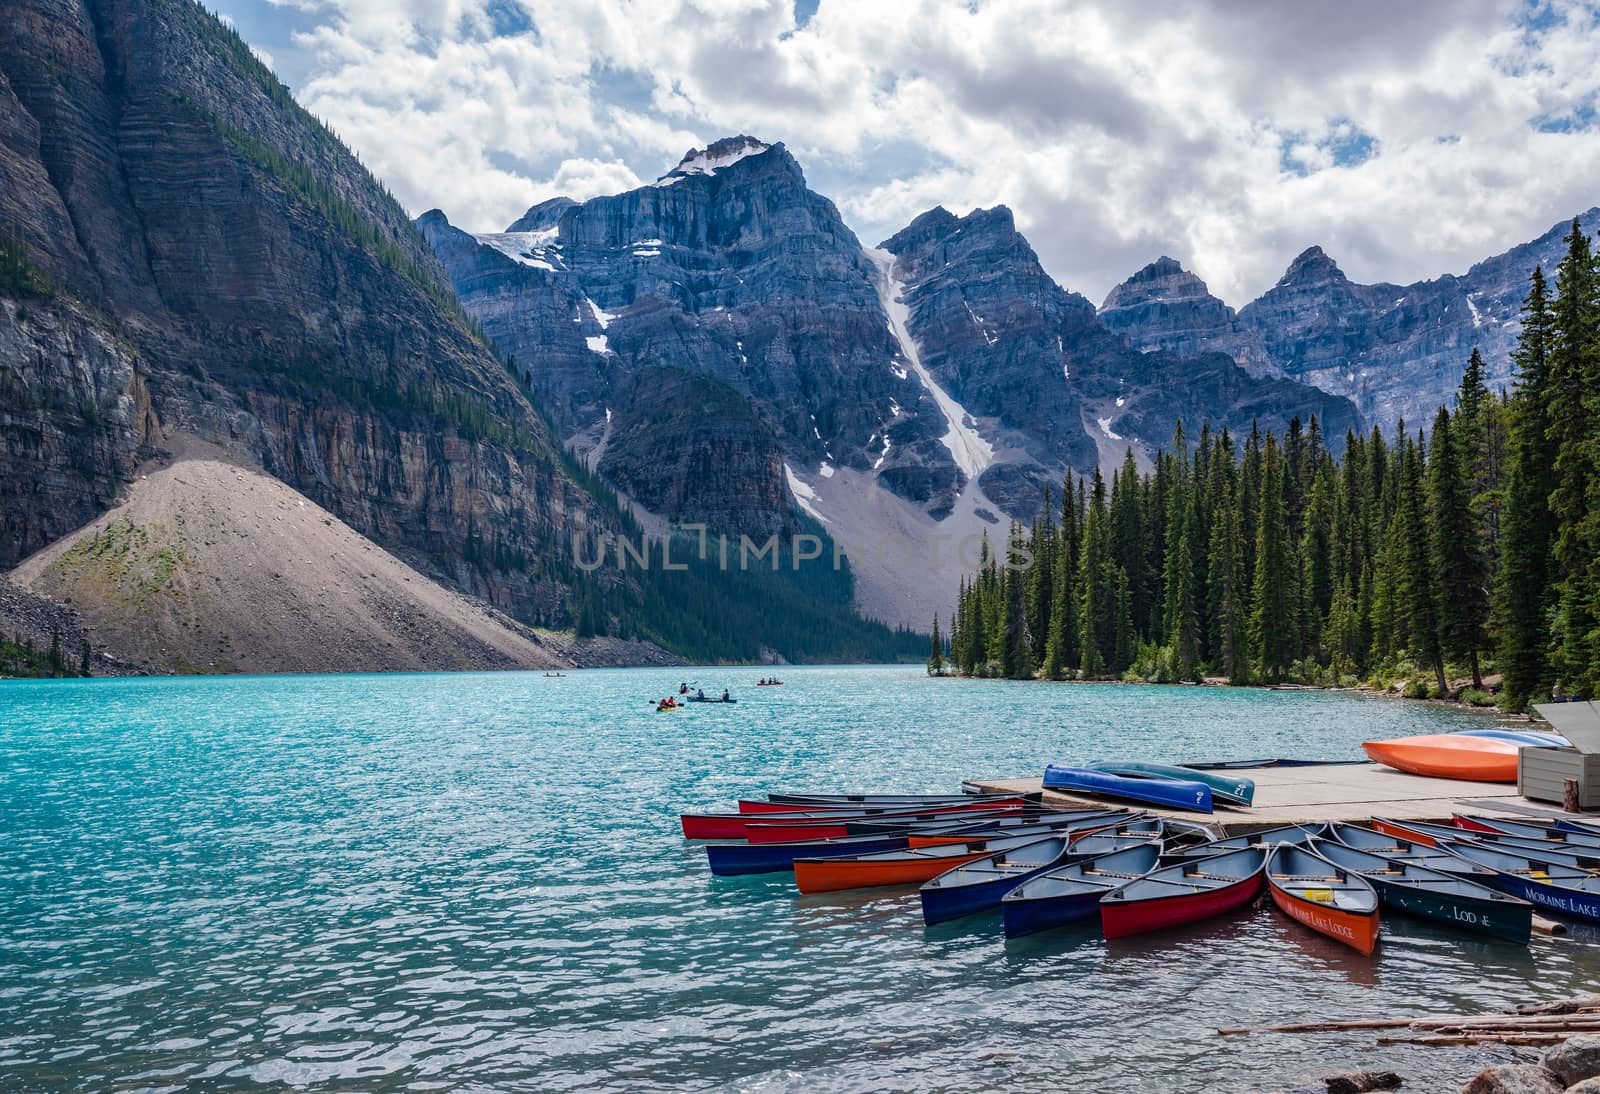 Banff, Canada--August 6, 2018.  Wide angle shot of Boaters on the aqua waters of Moraine Lake surrounded by the Ten Peaks.